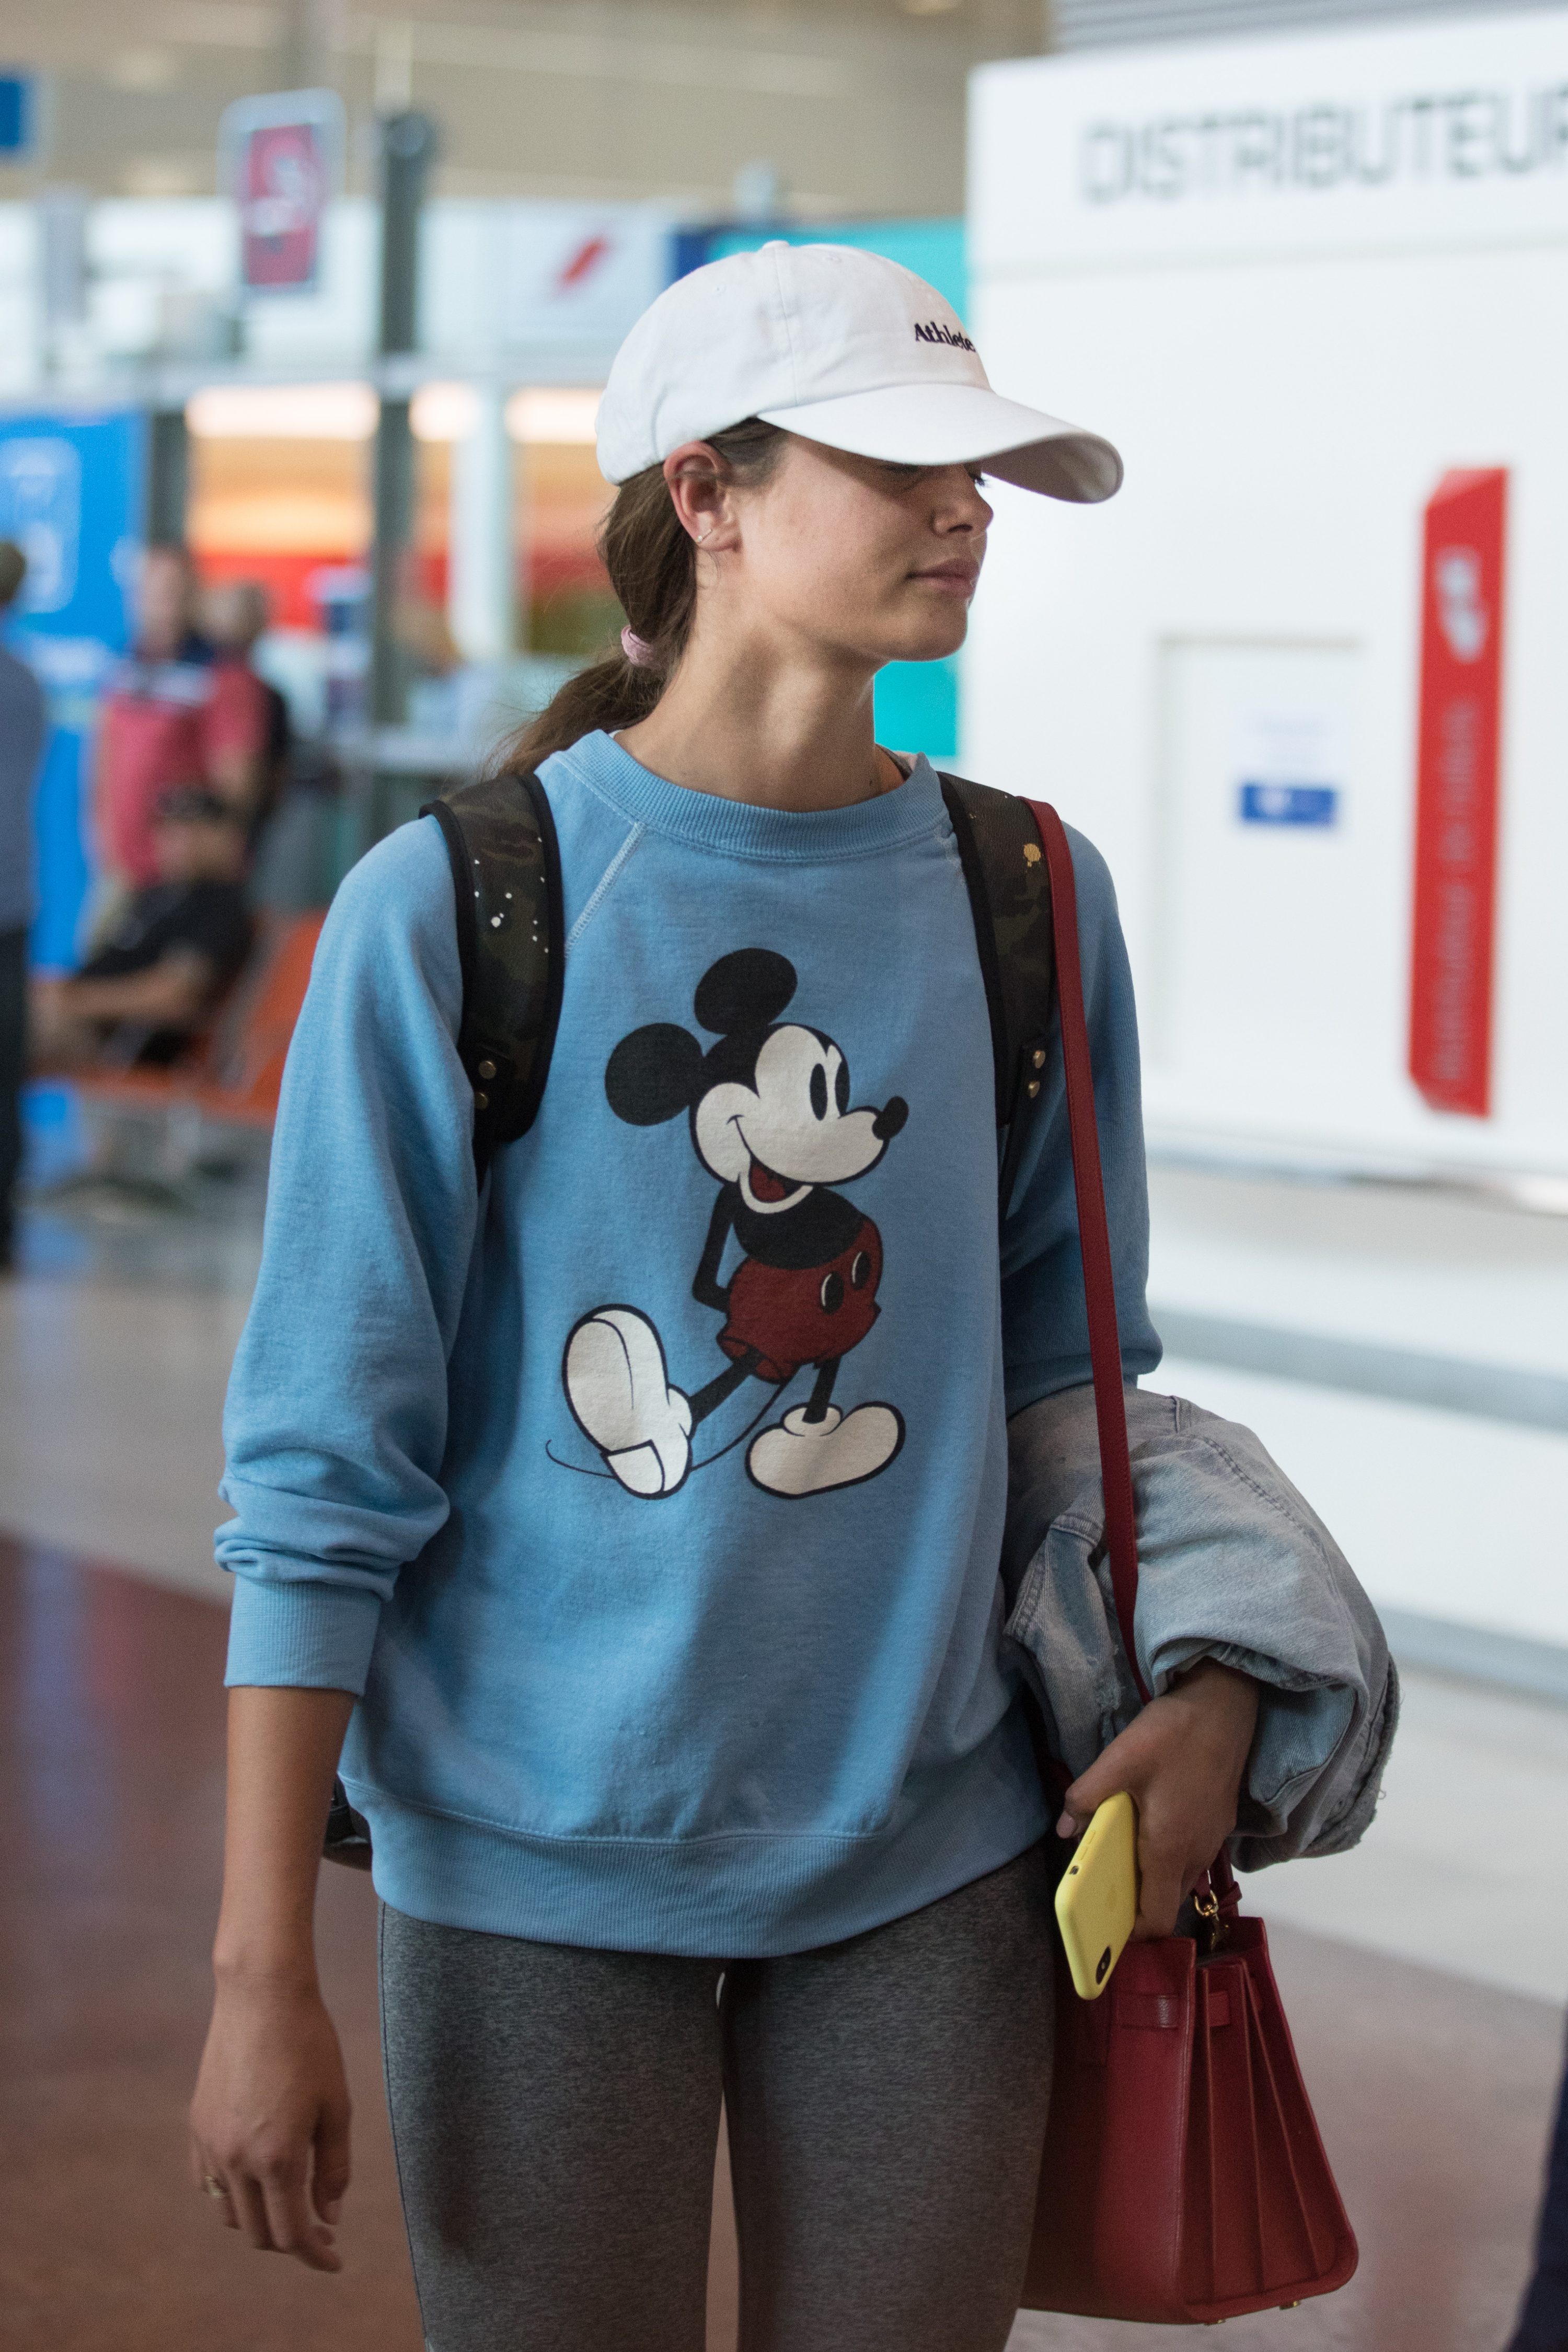 Taylor Hill at Charles de Gaulle airport in Paris